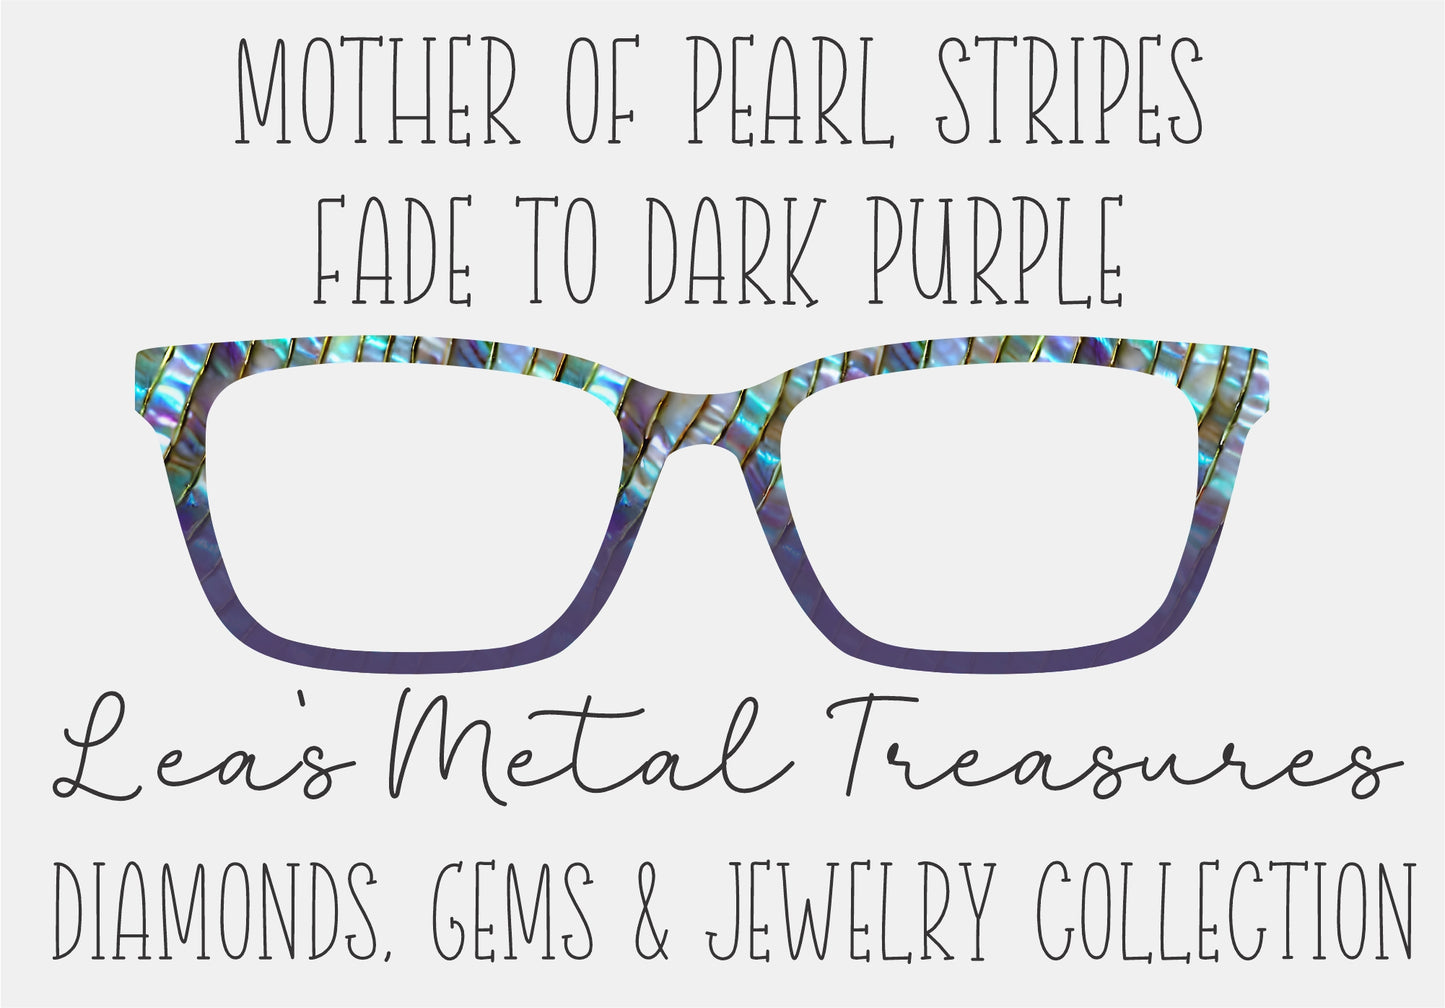 MOTHER OF PEARL STRIPES FADE TO DARK PURPLE Eyewear Frame Toppers COMES WITH MAGNETS